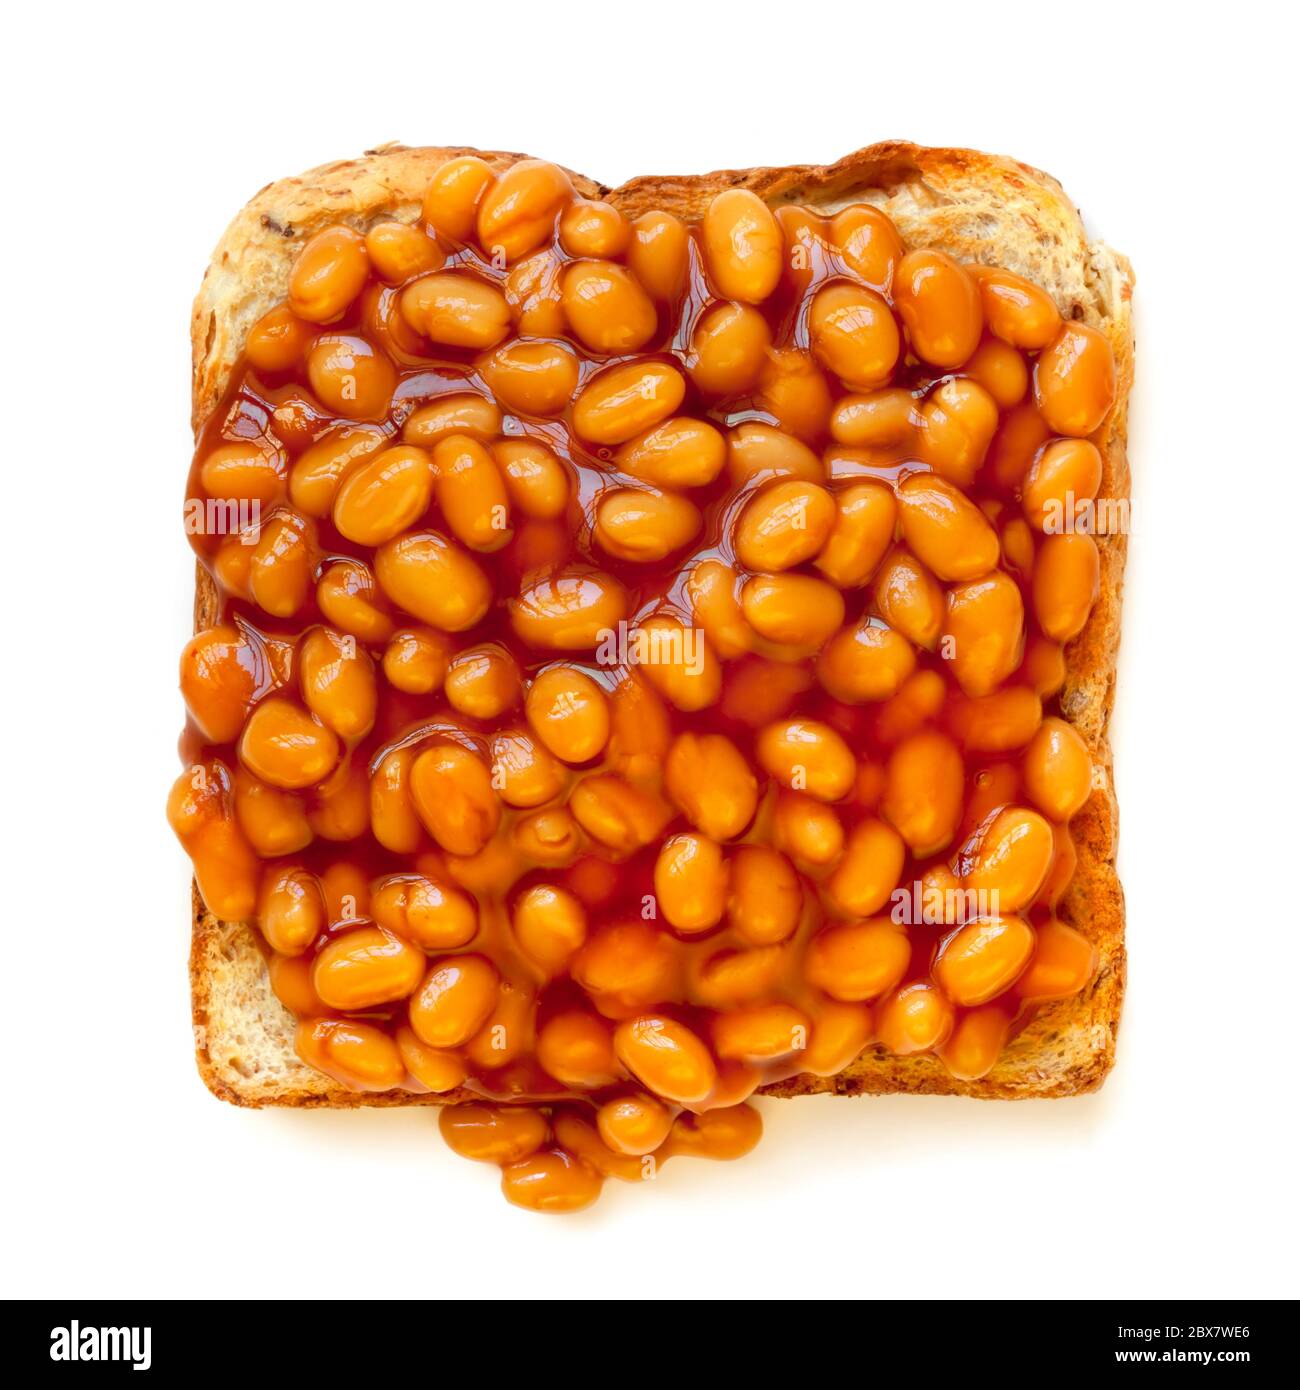 Baked beans on toast, isolated on white background.  Overhead view. Stock Photo